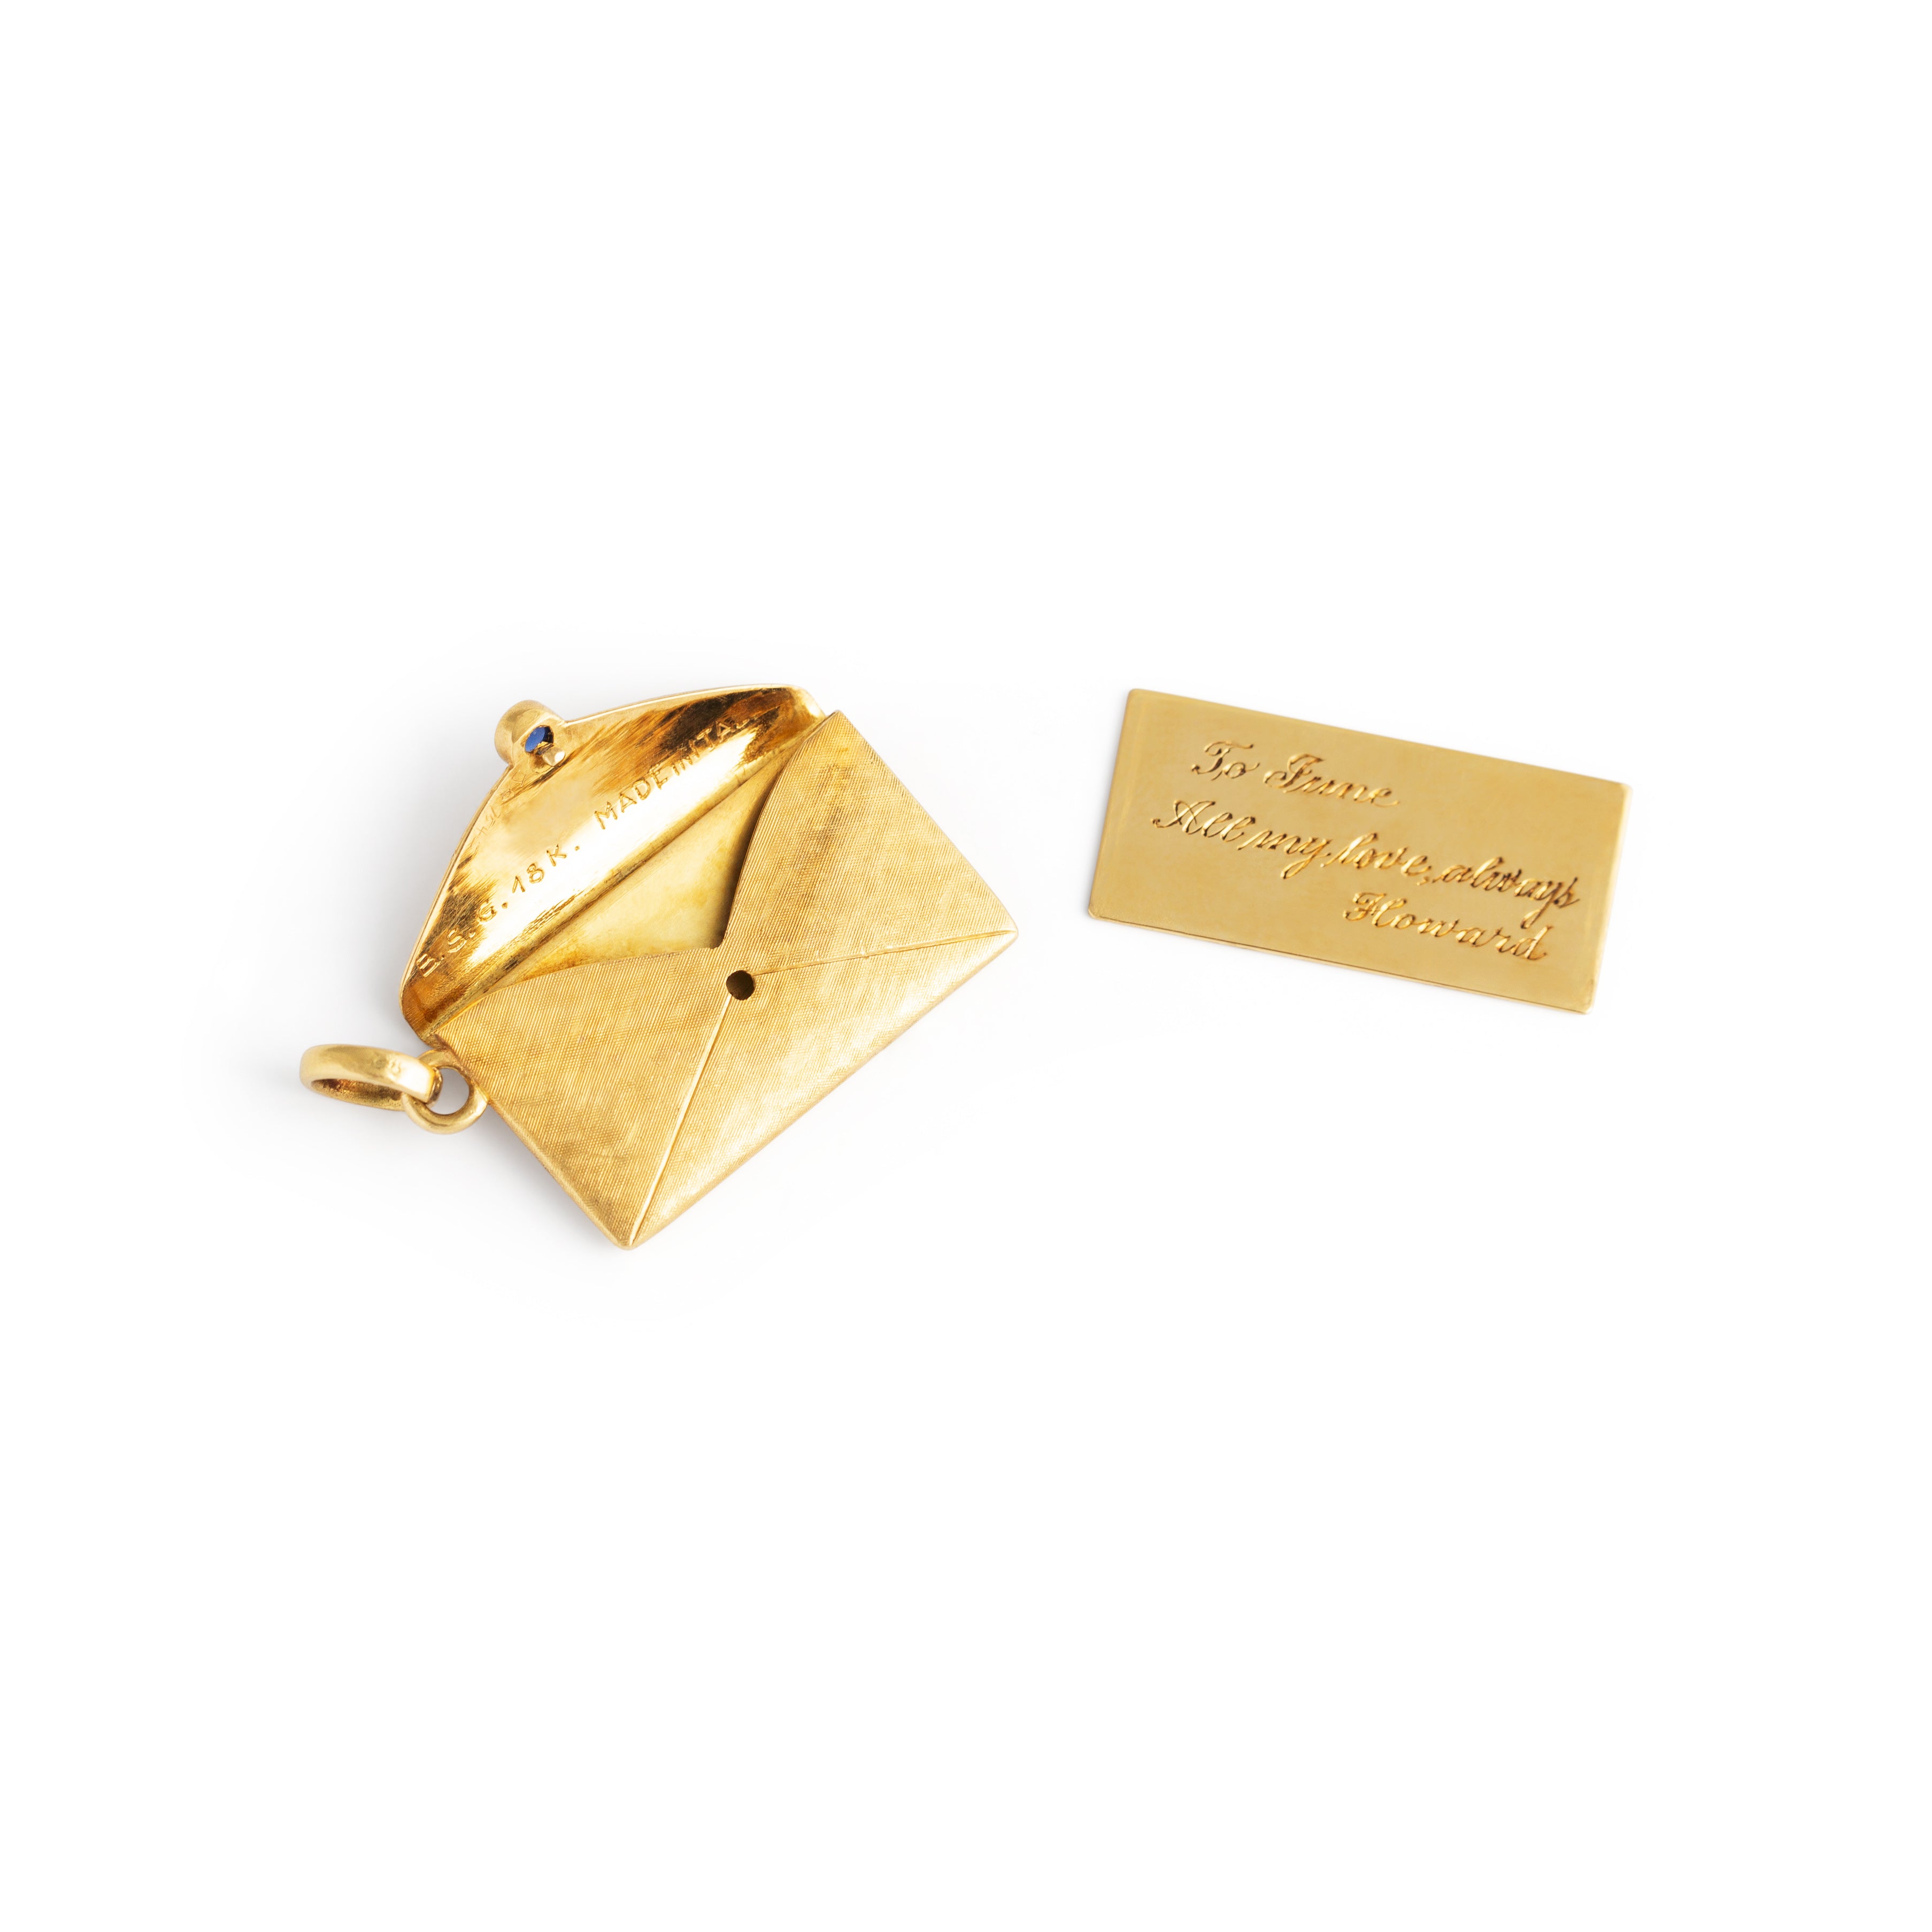 Envelope and Love Letter 18k Gold and Sapphire Necklace